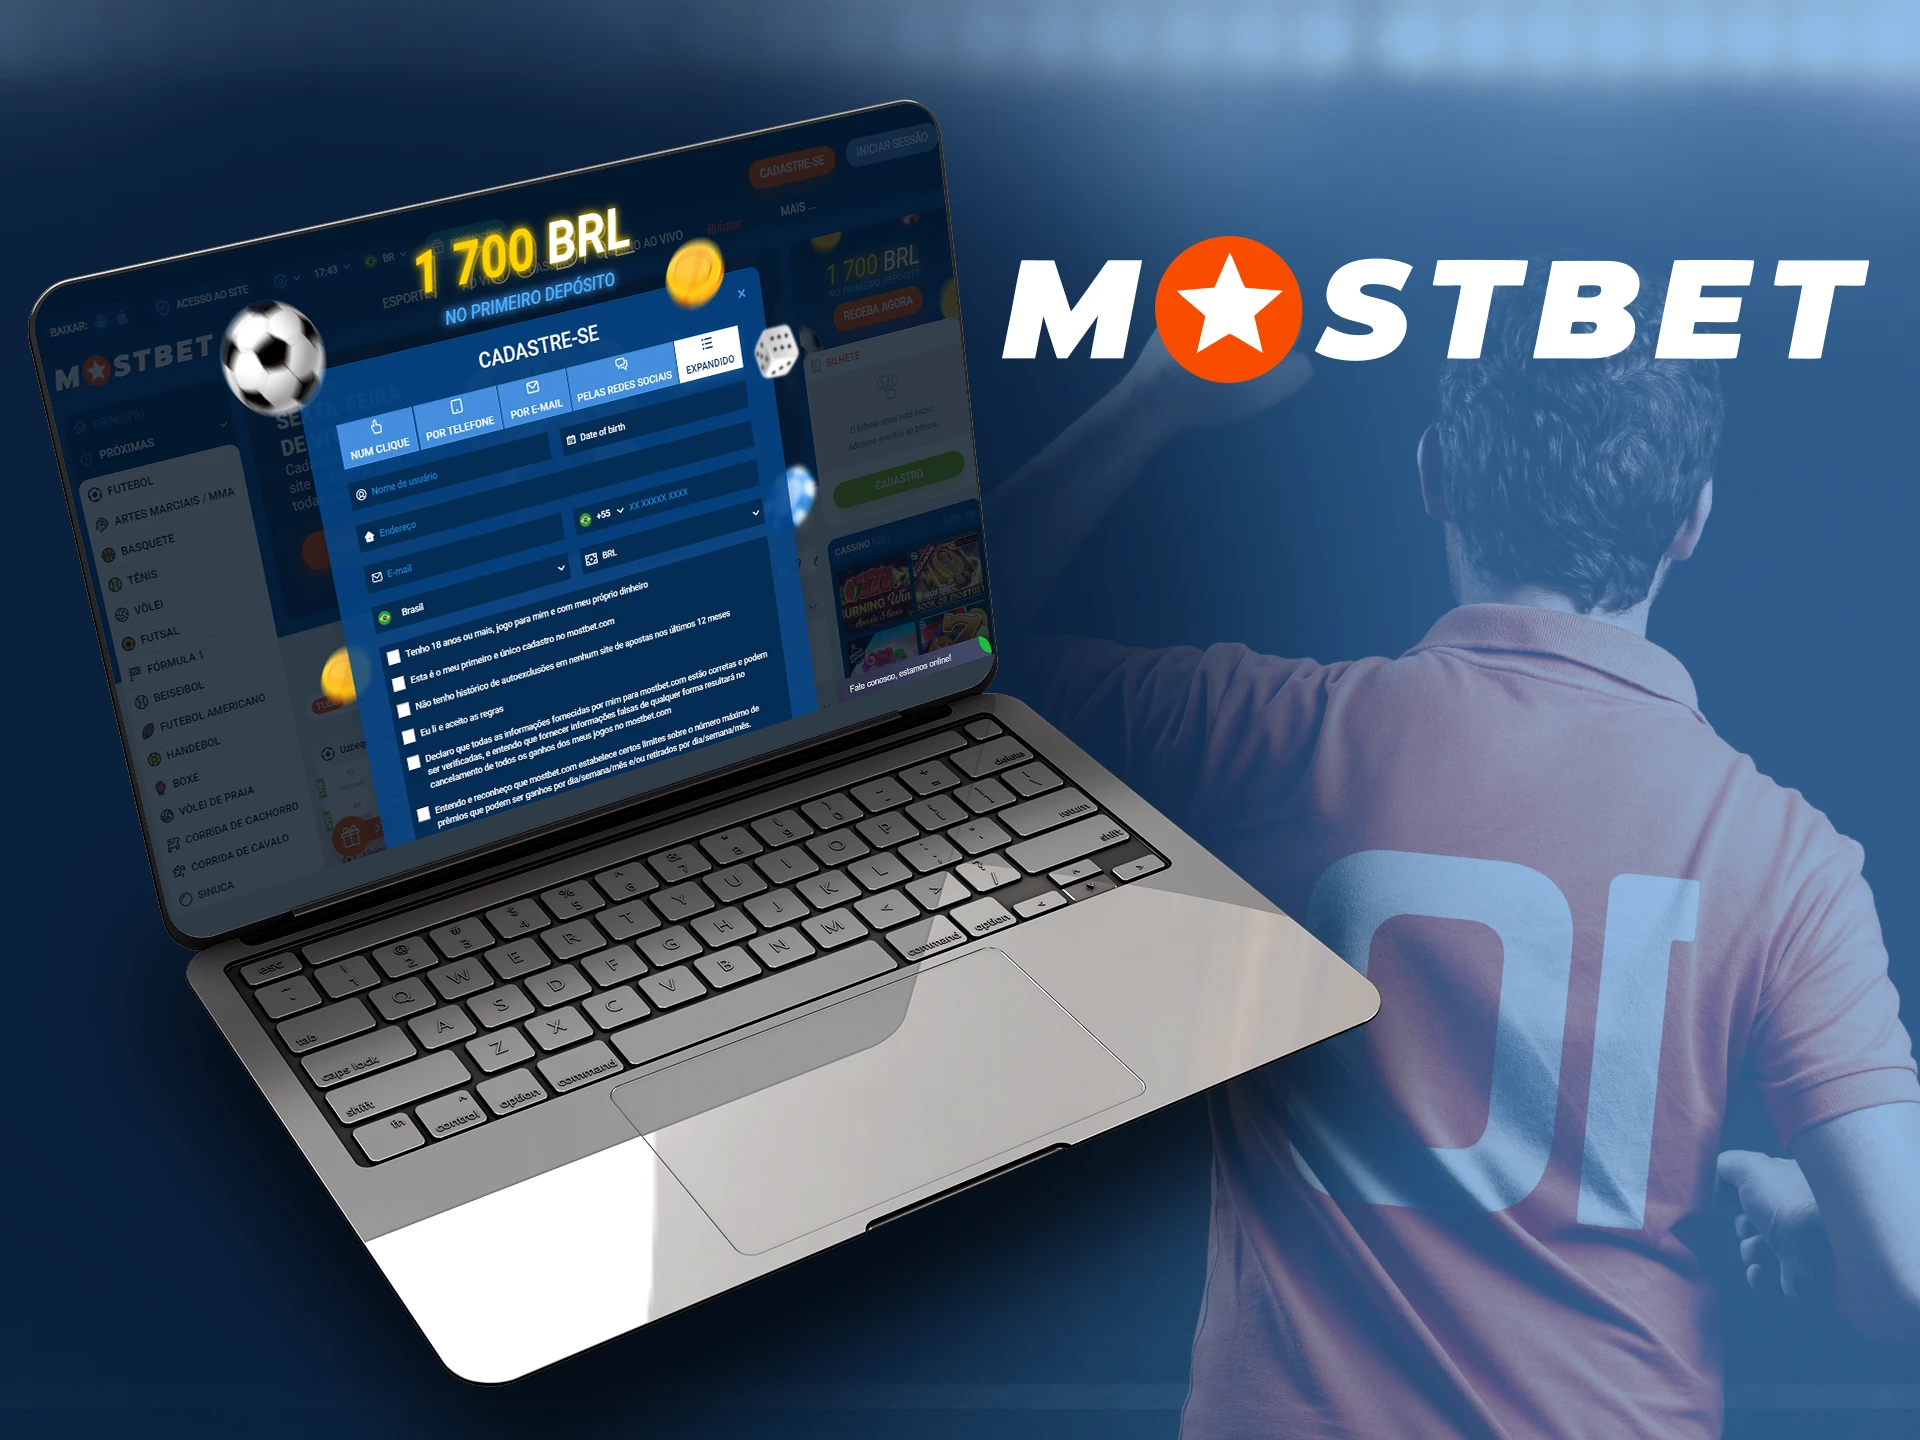 To register with Mostbet you need to meet some requirements.